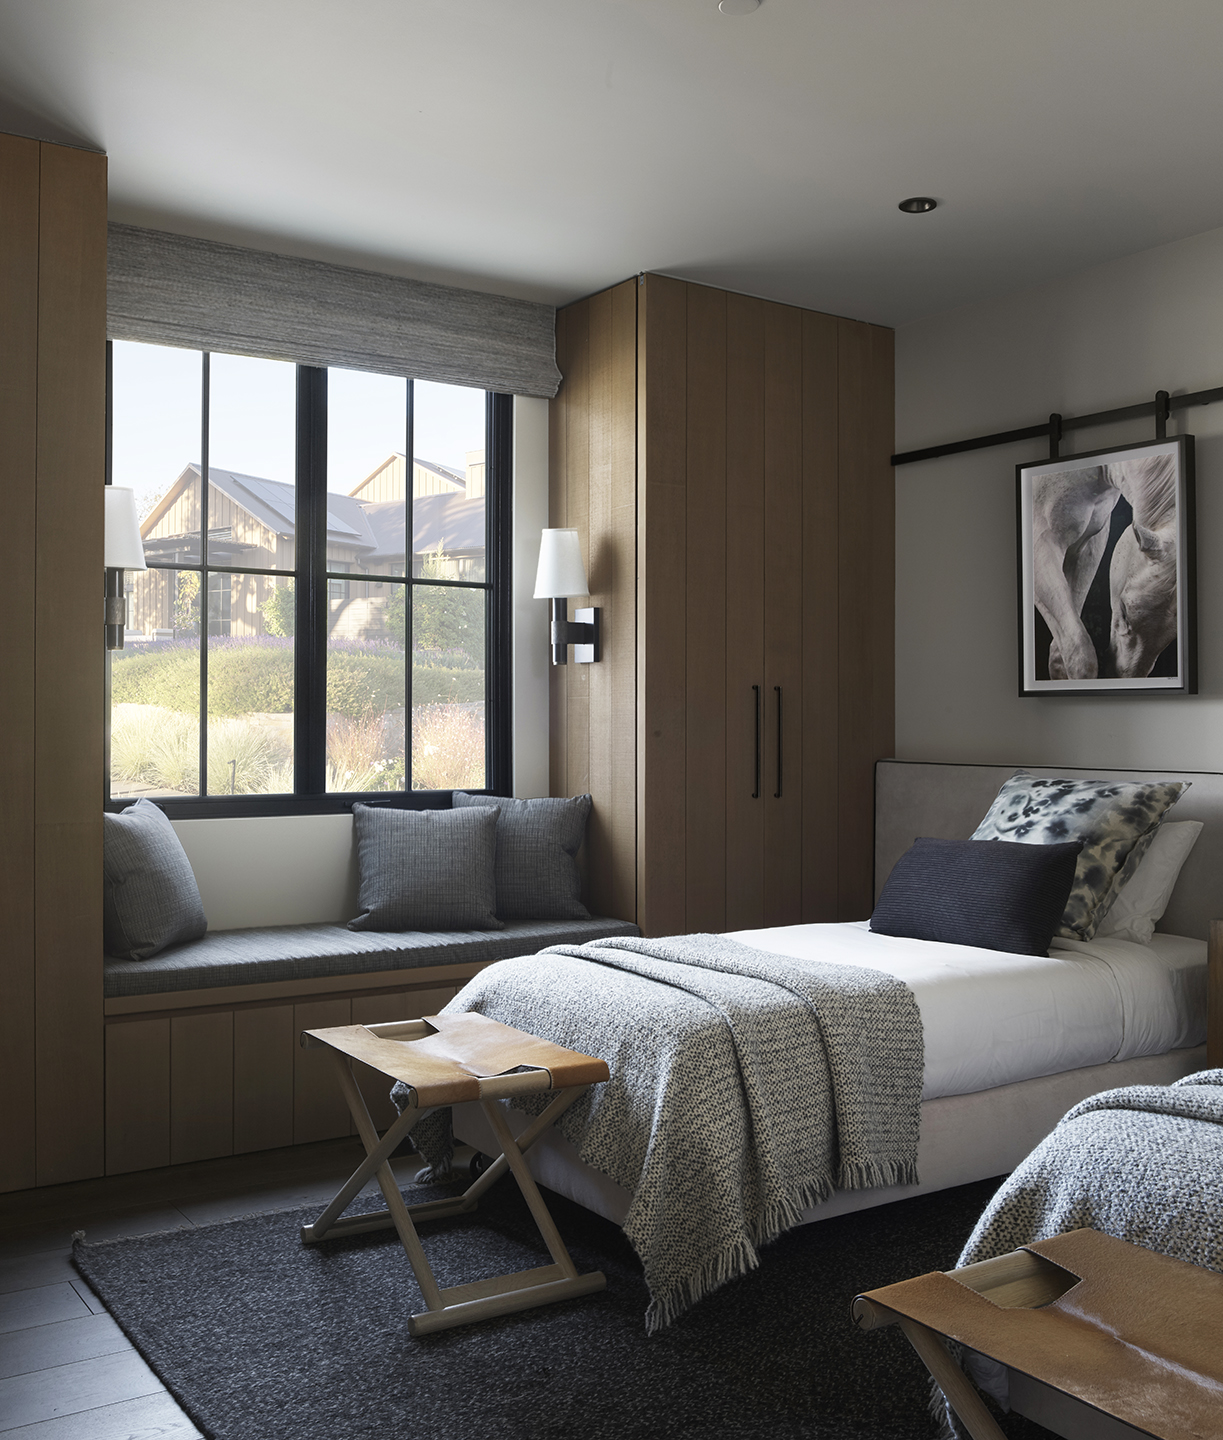 Jennifer-Robin-Interiors-Project-Modern-Country-Estate-23-Guest-House-Bedroom